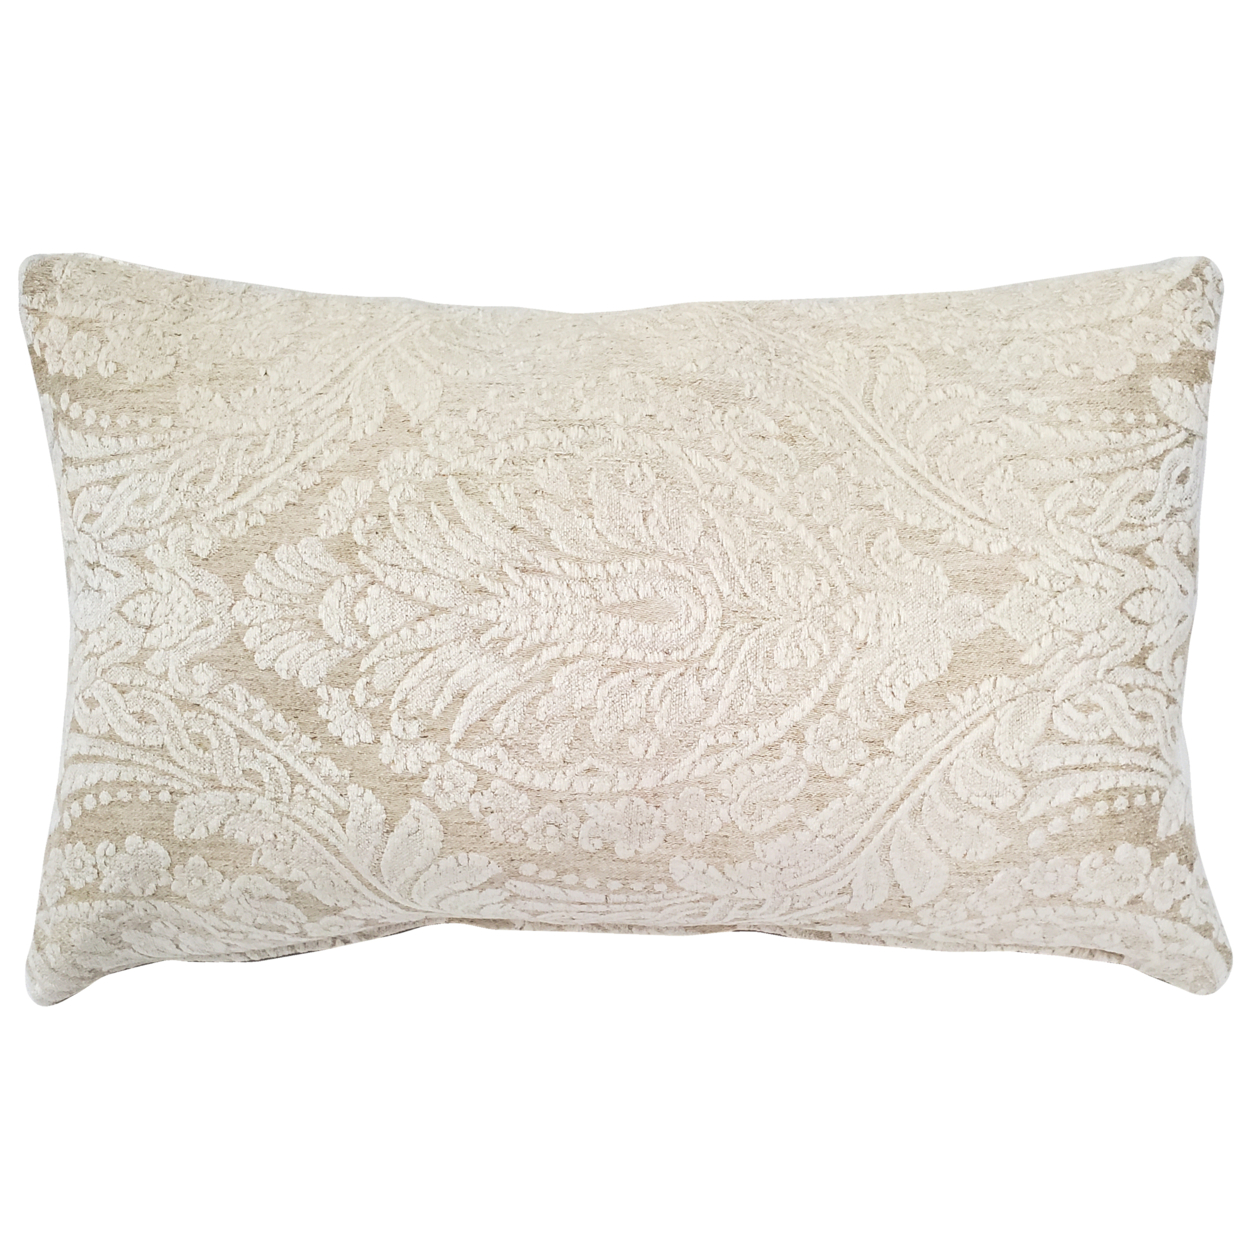 Jacquard Damask In Cream Throw Pillow 12x19, With Polyfill Insert